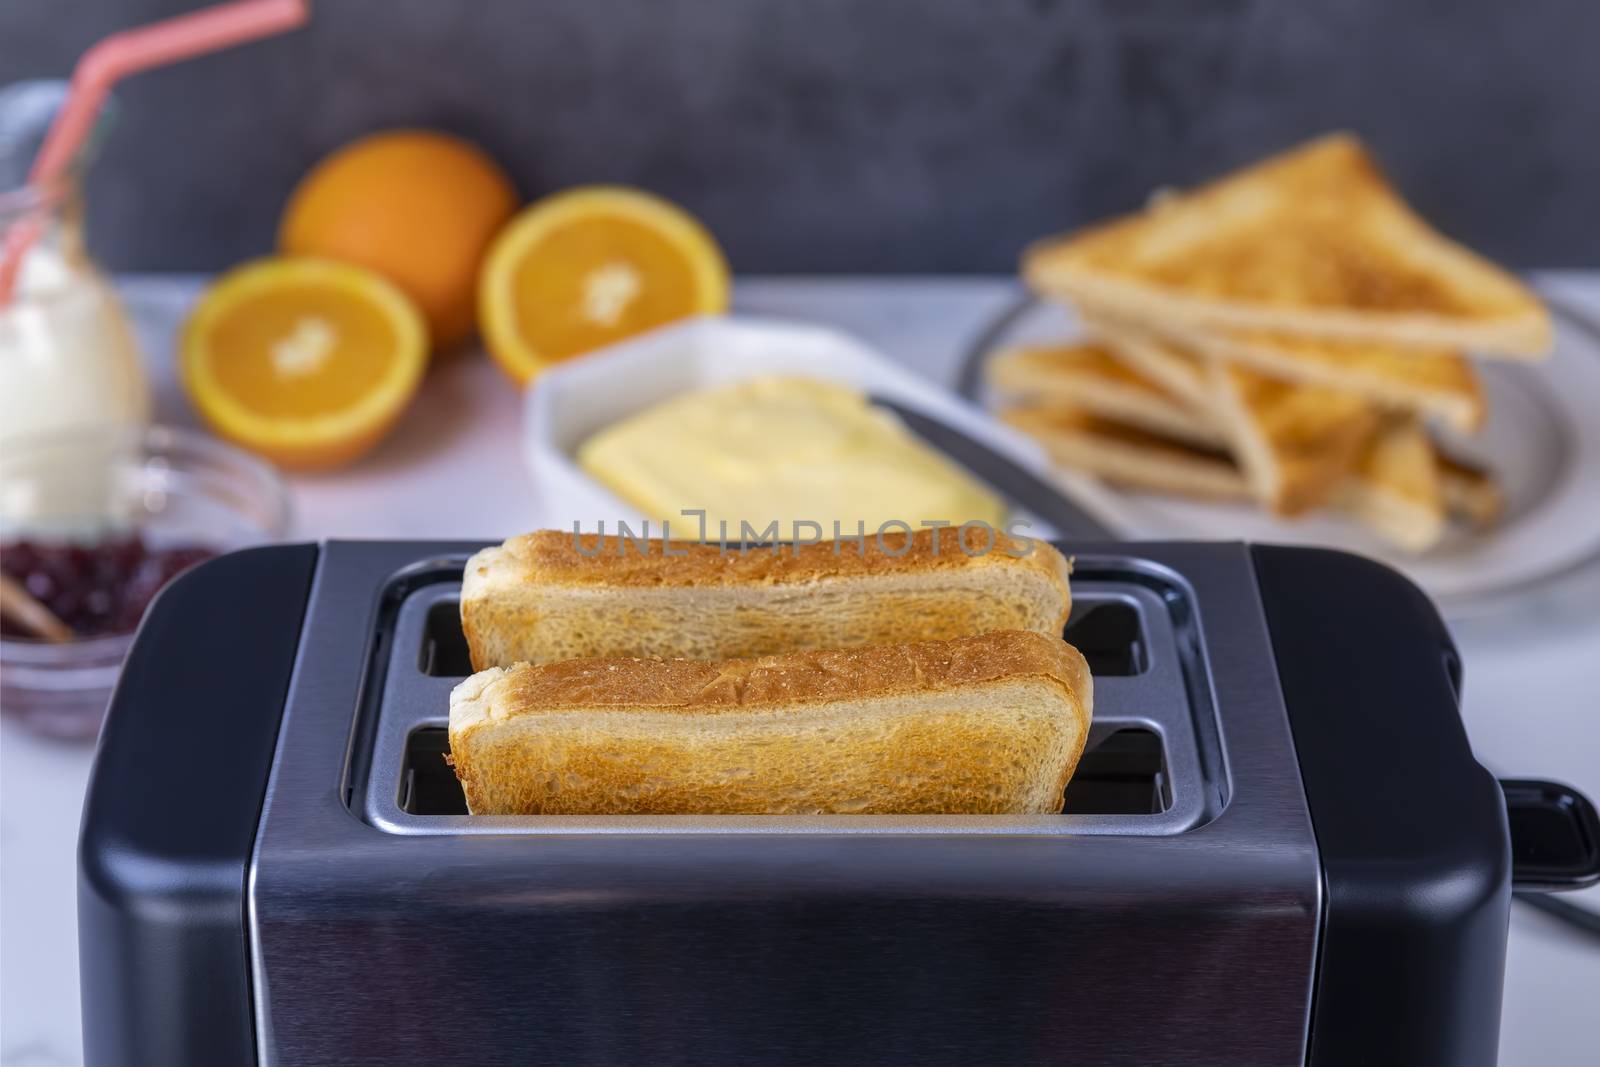 Slices of great toast coming out of the toaster. Healthy breakfast food and heating technology concept.  Focus on slice of great.